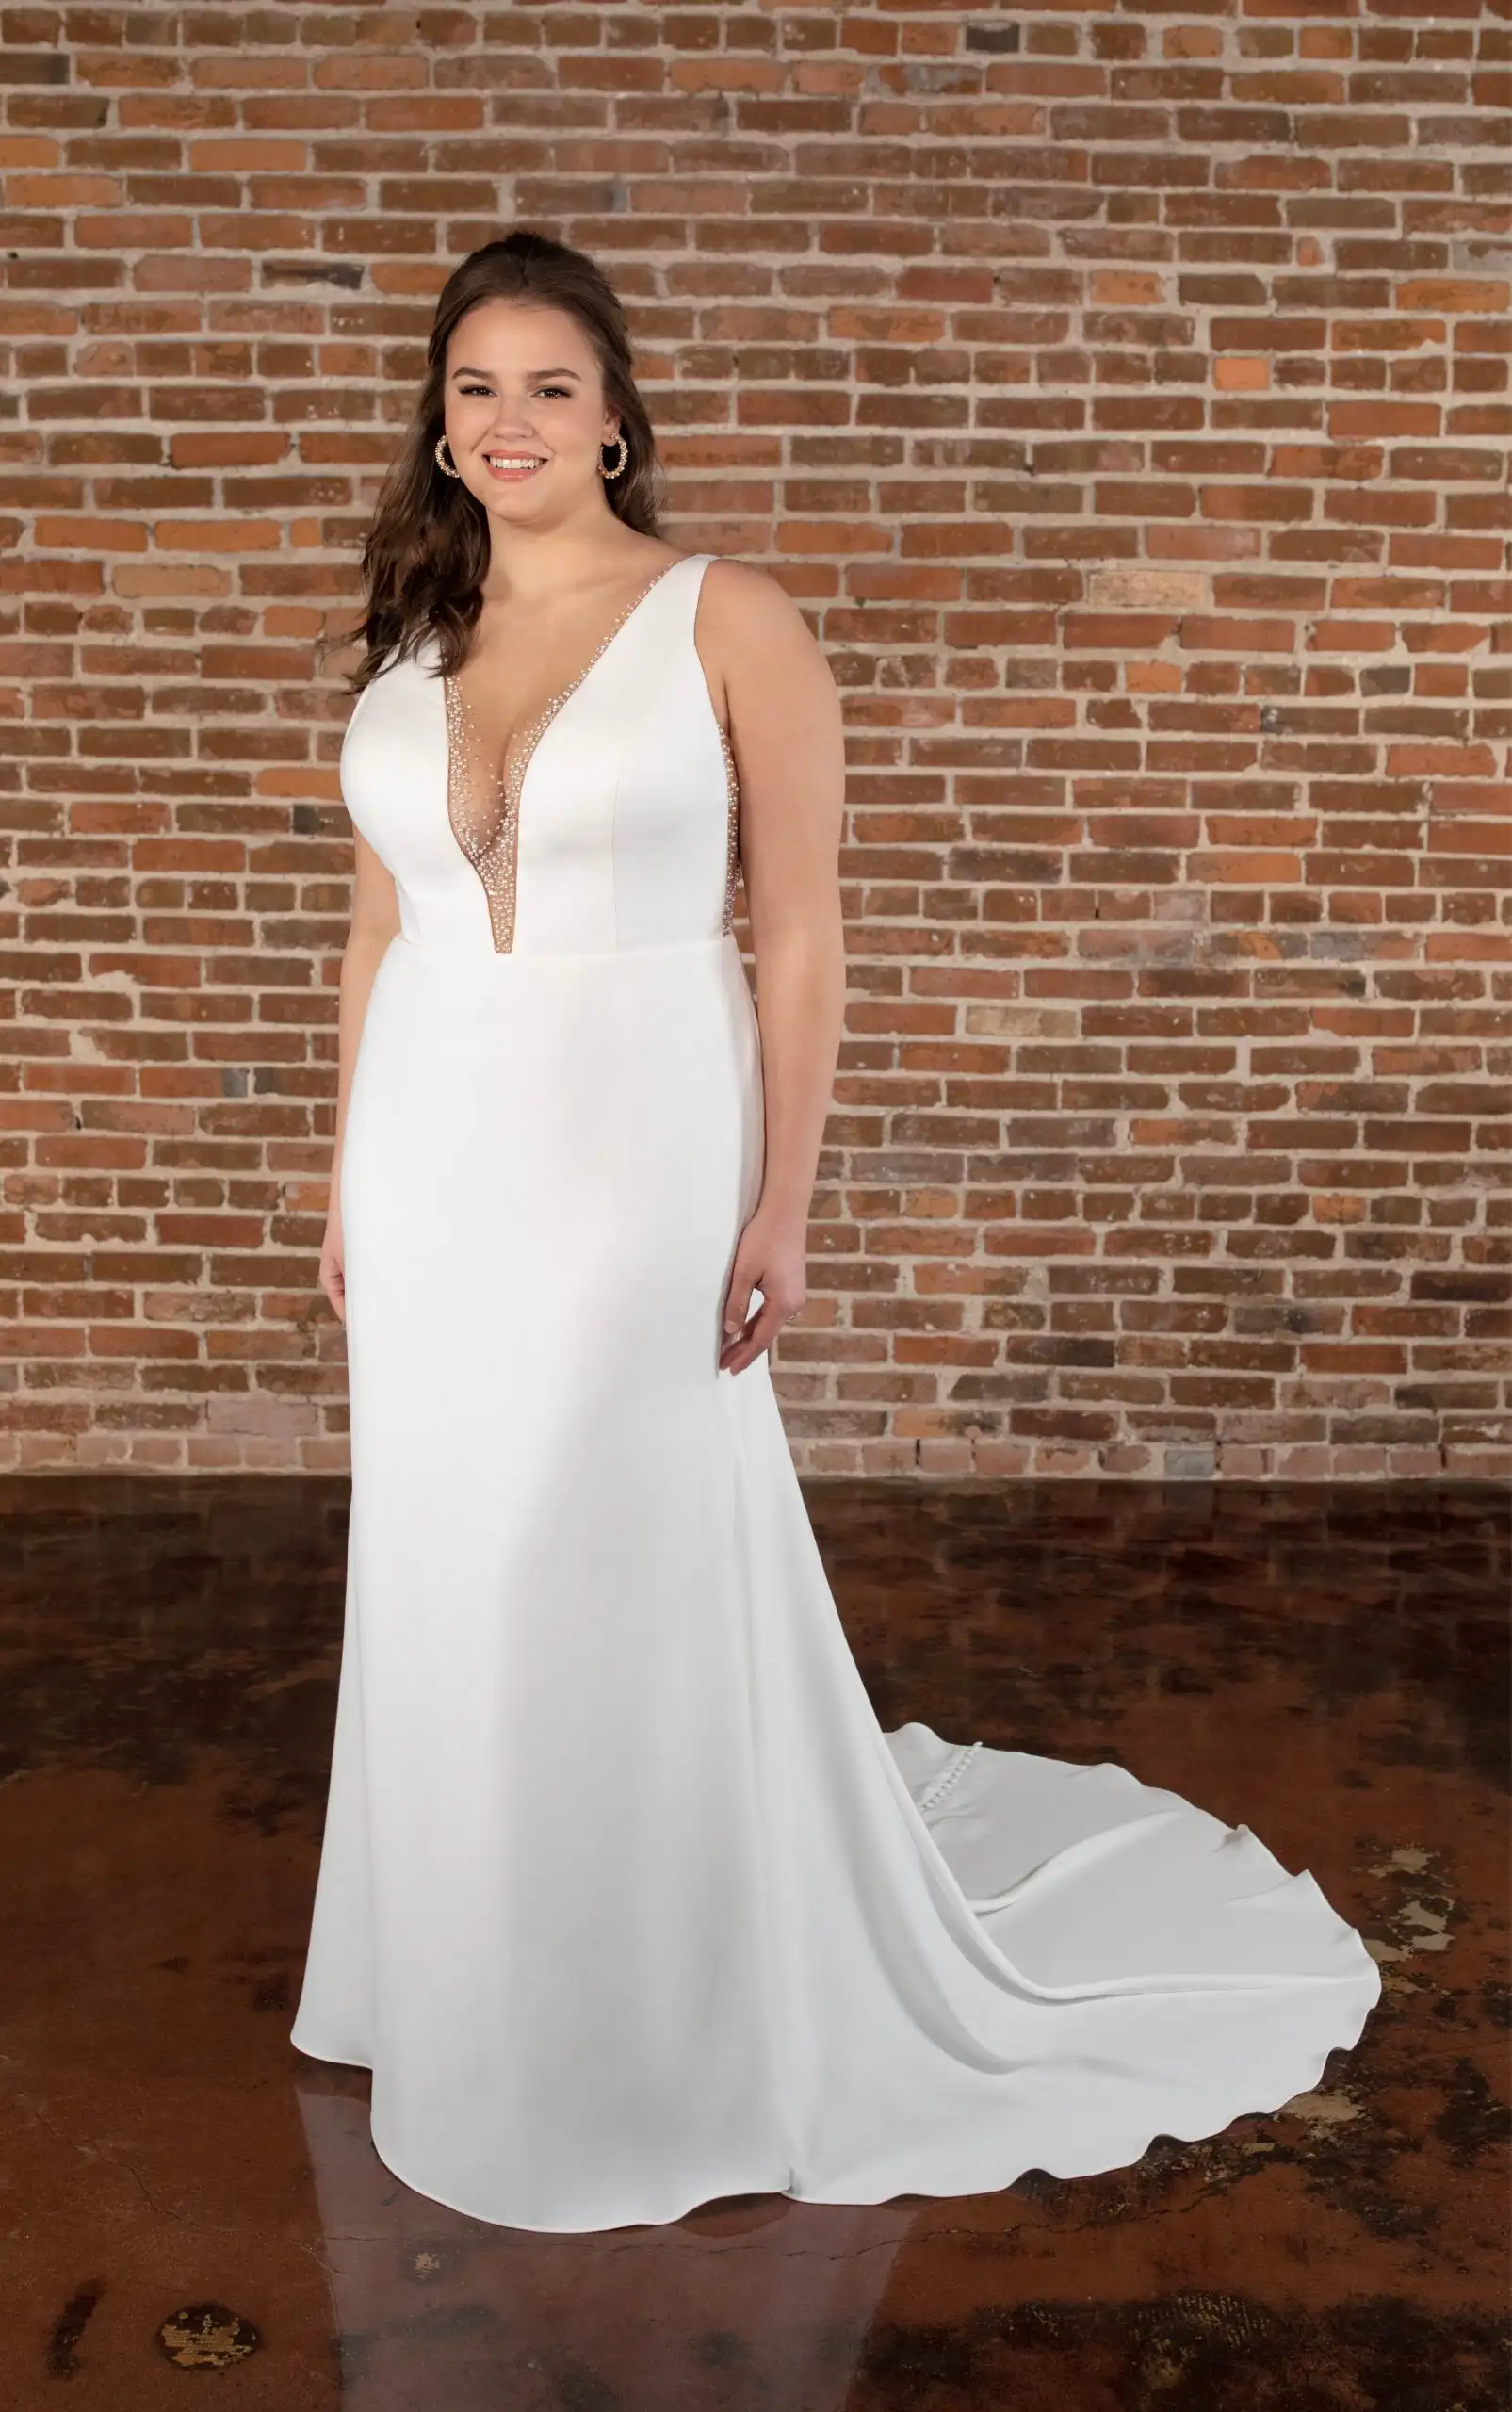 Minimalist Chic Plus Size Sheath Wedding Dress with Plunging Neckline and Beaded Detail, D3763+, by Essense of Australia